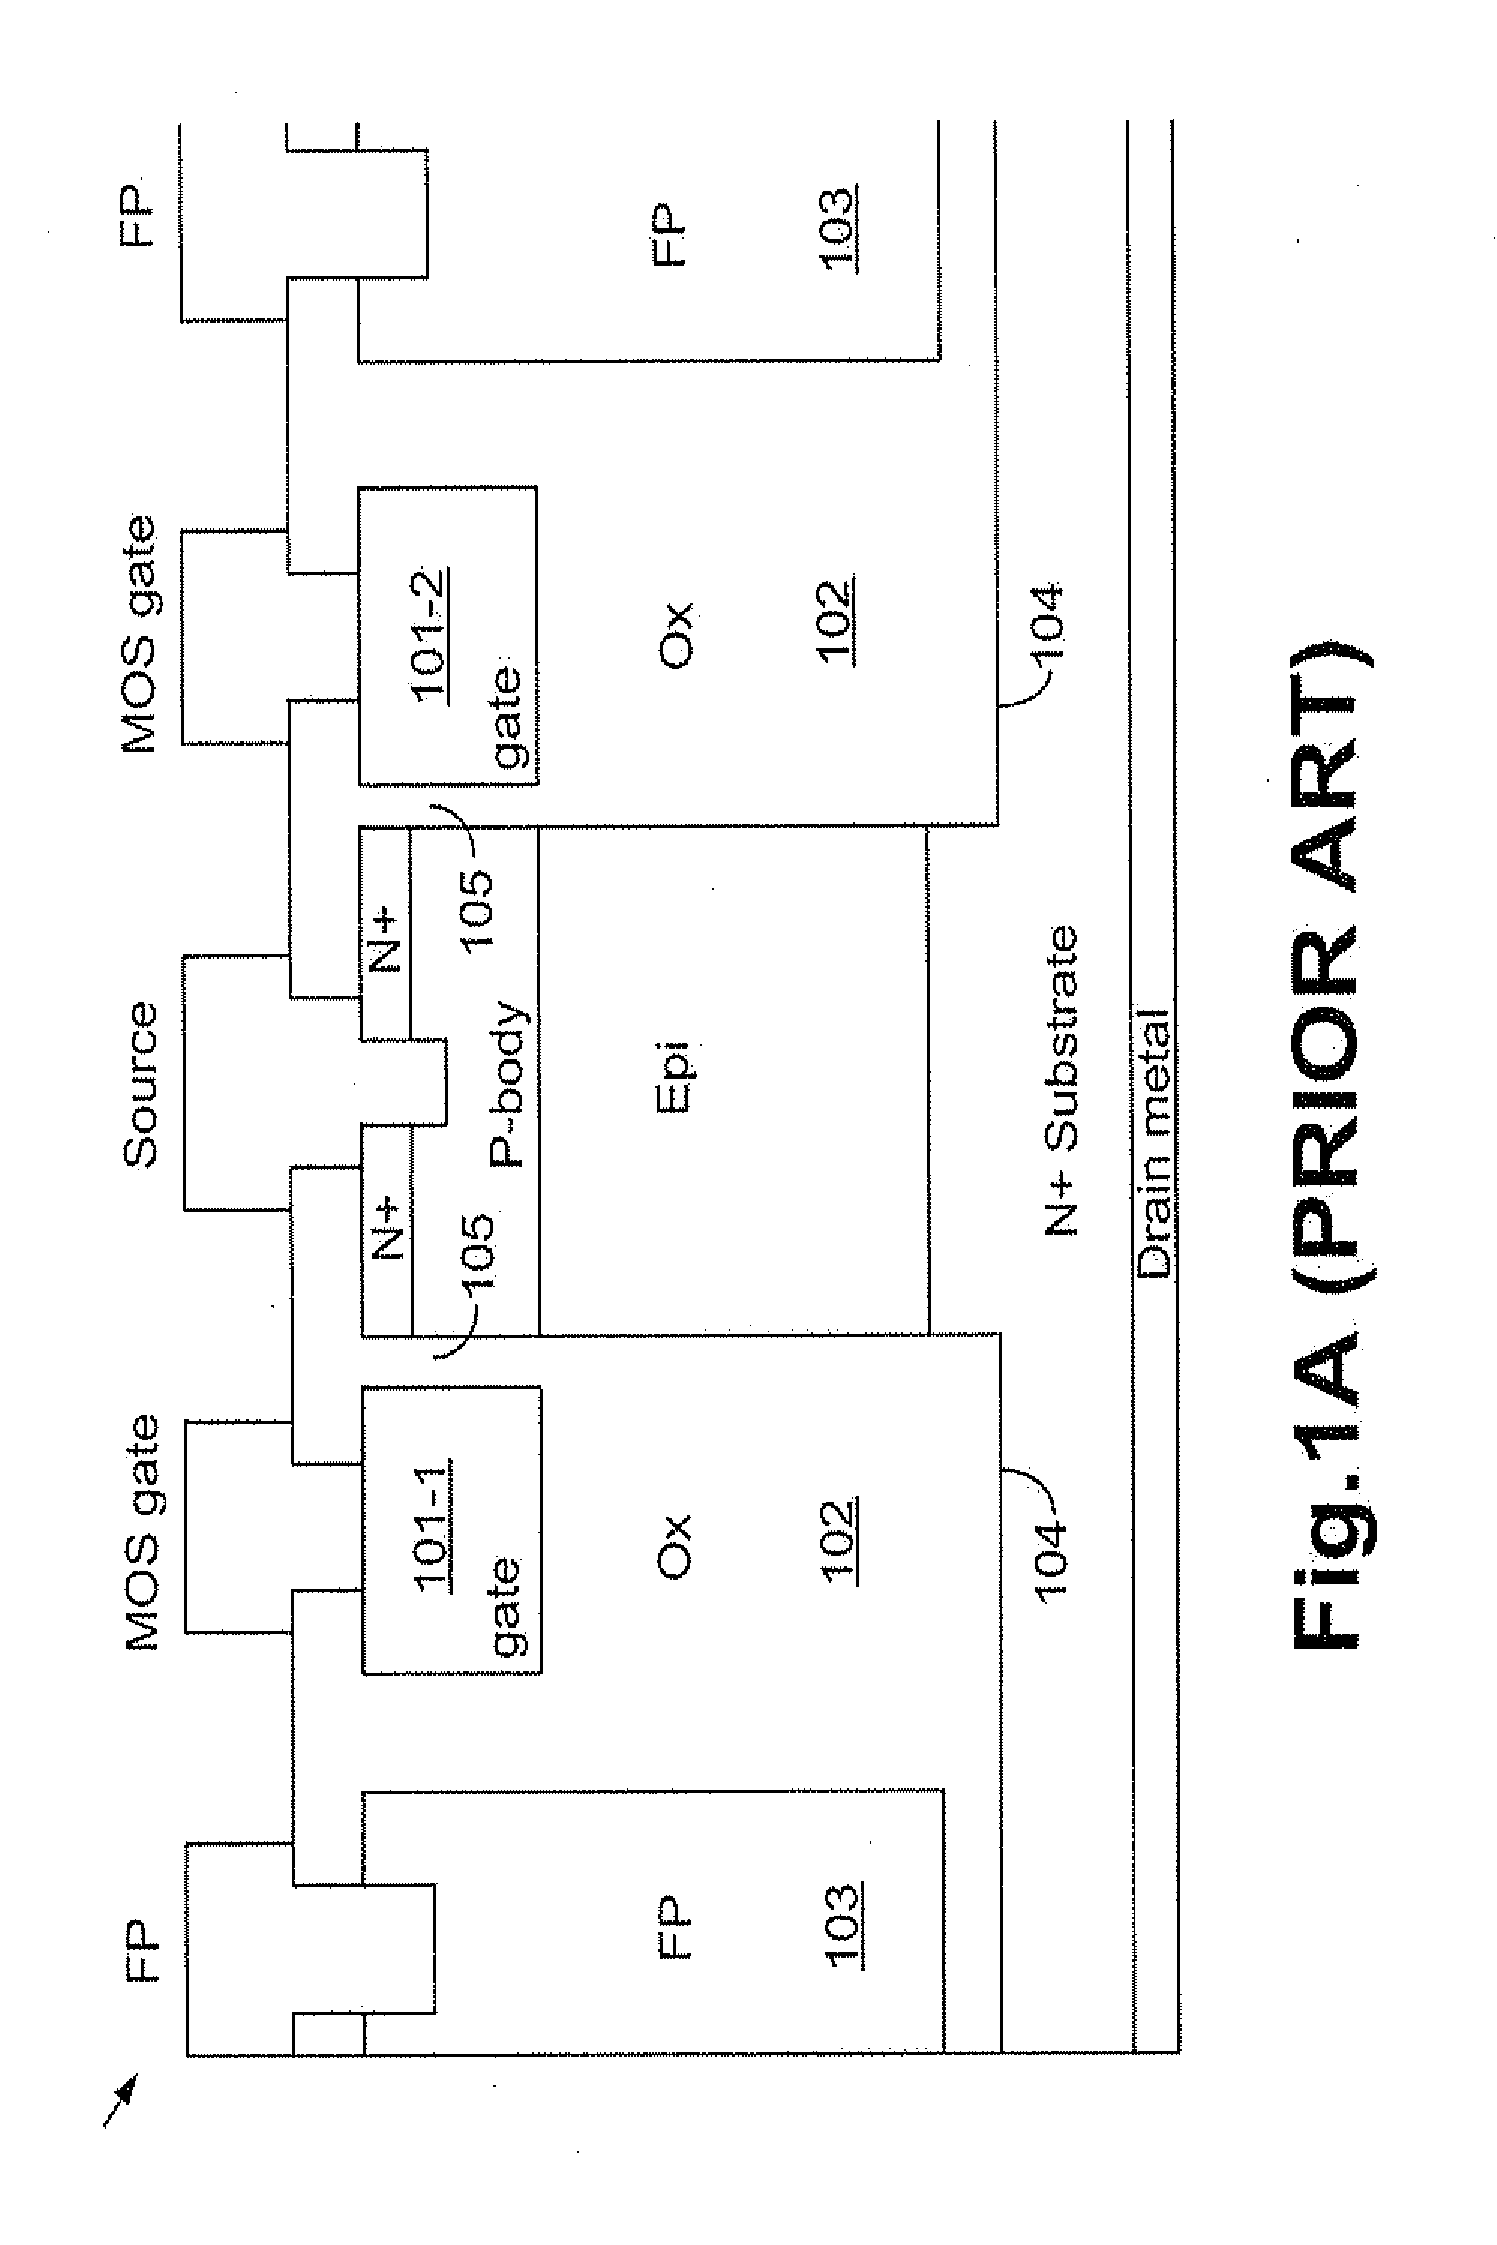 Trench mosfet with resurf stepped oxide and diffused drift region